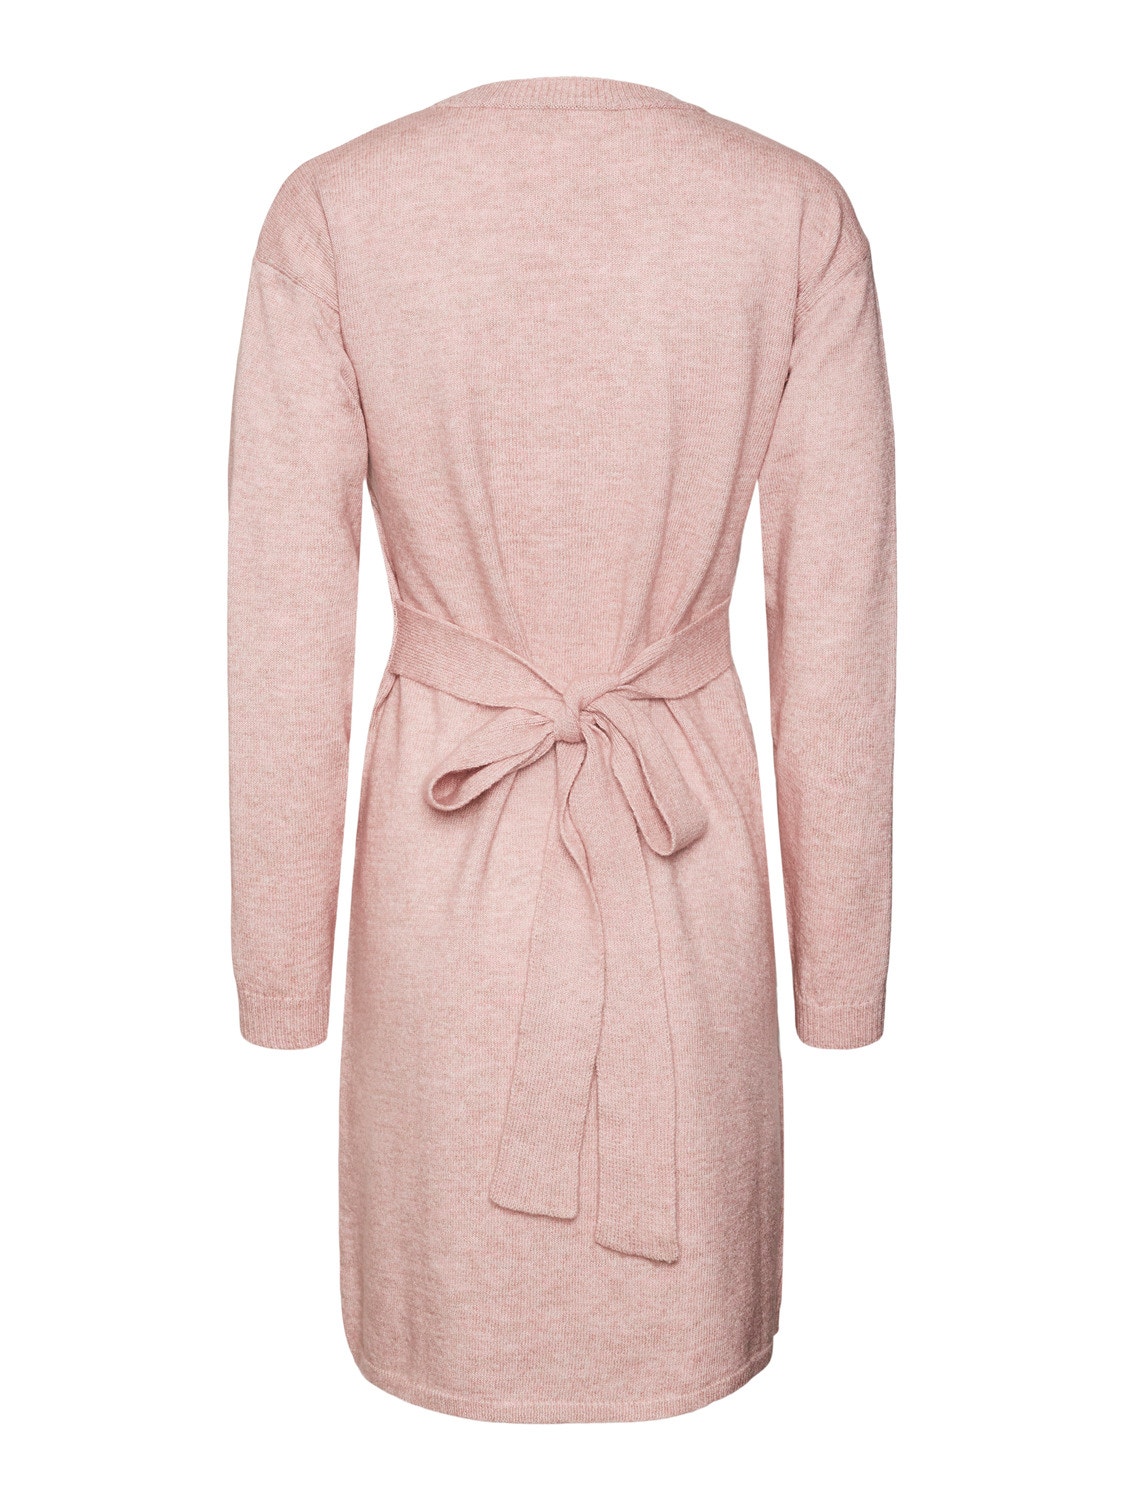 MAMA.LICIOUS Robe en maille -Misty Rose - 20018693